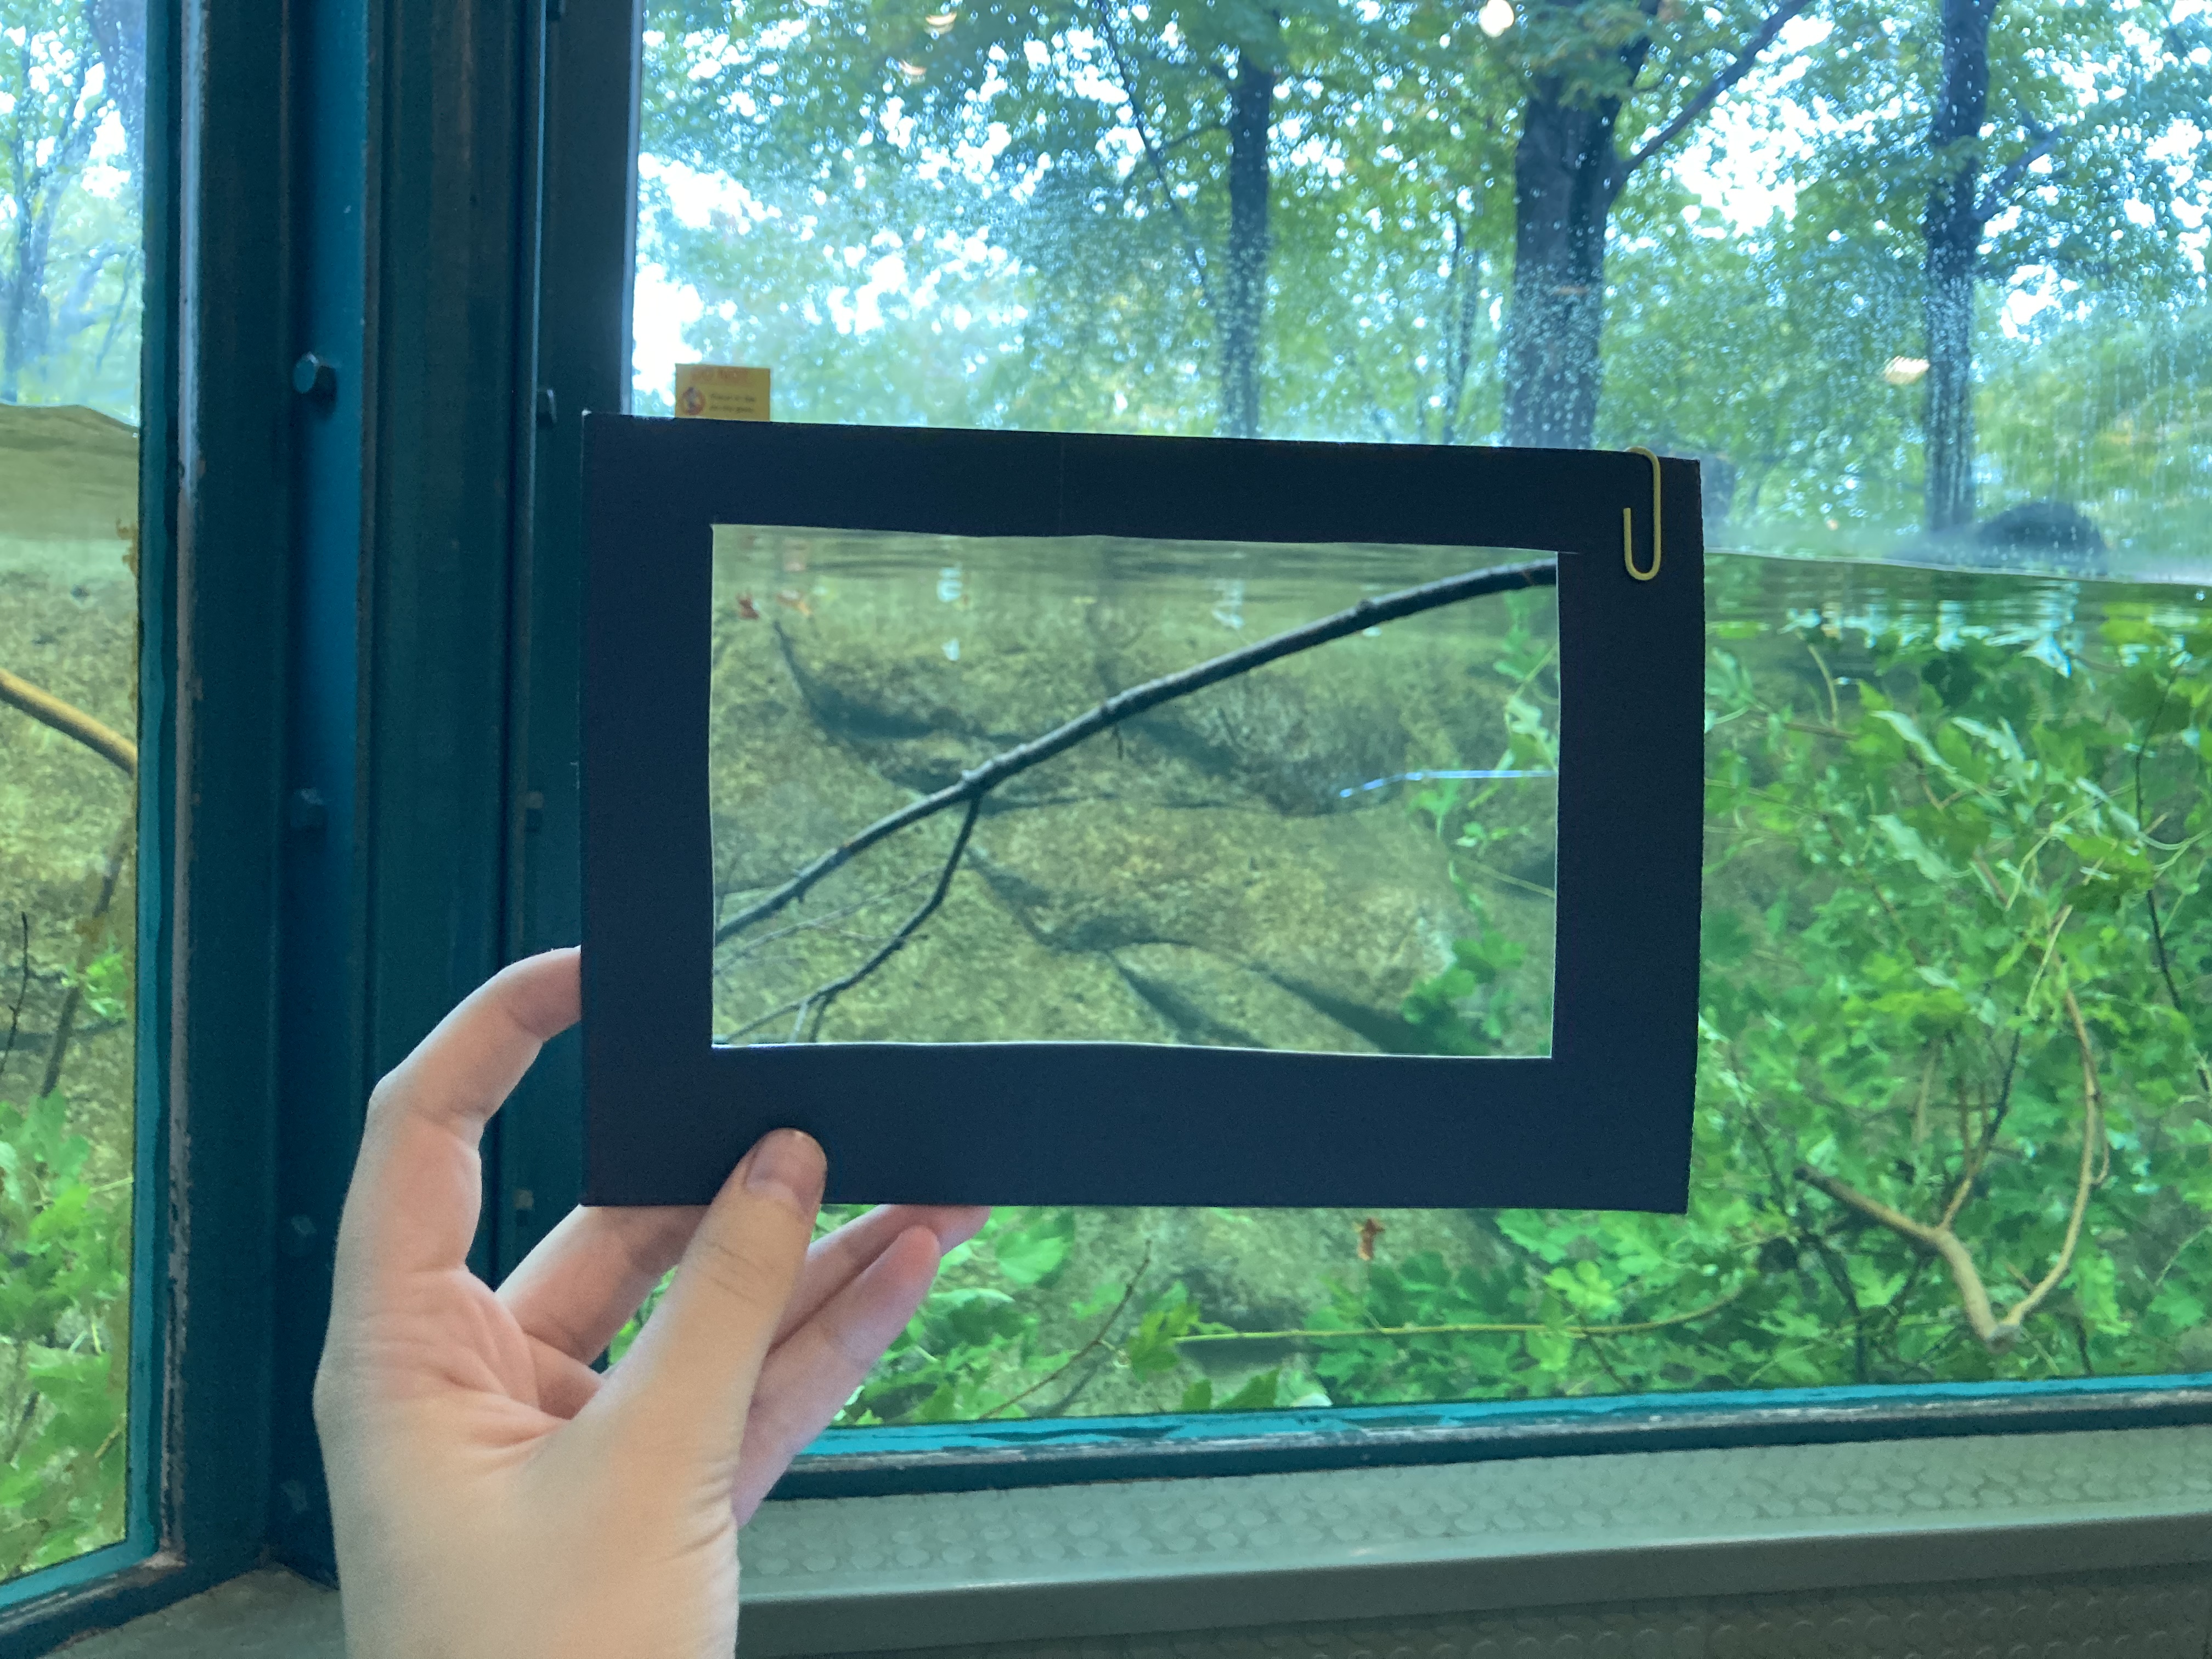 A black frame is held in a hand, through which a window shows part of the watery exhibit behind.